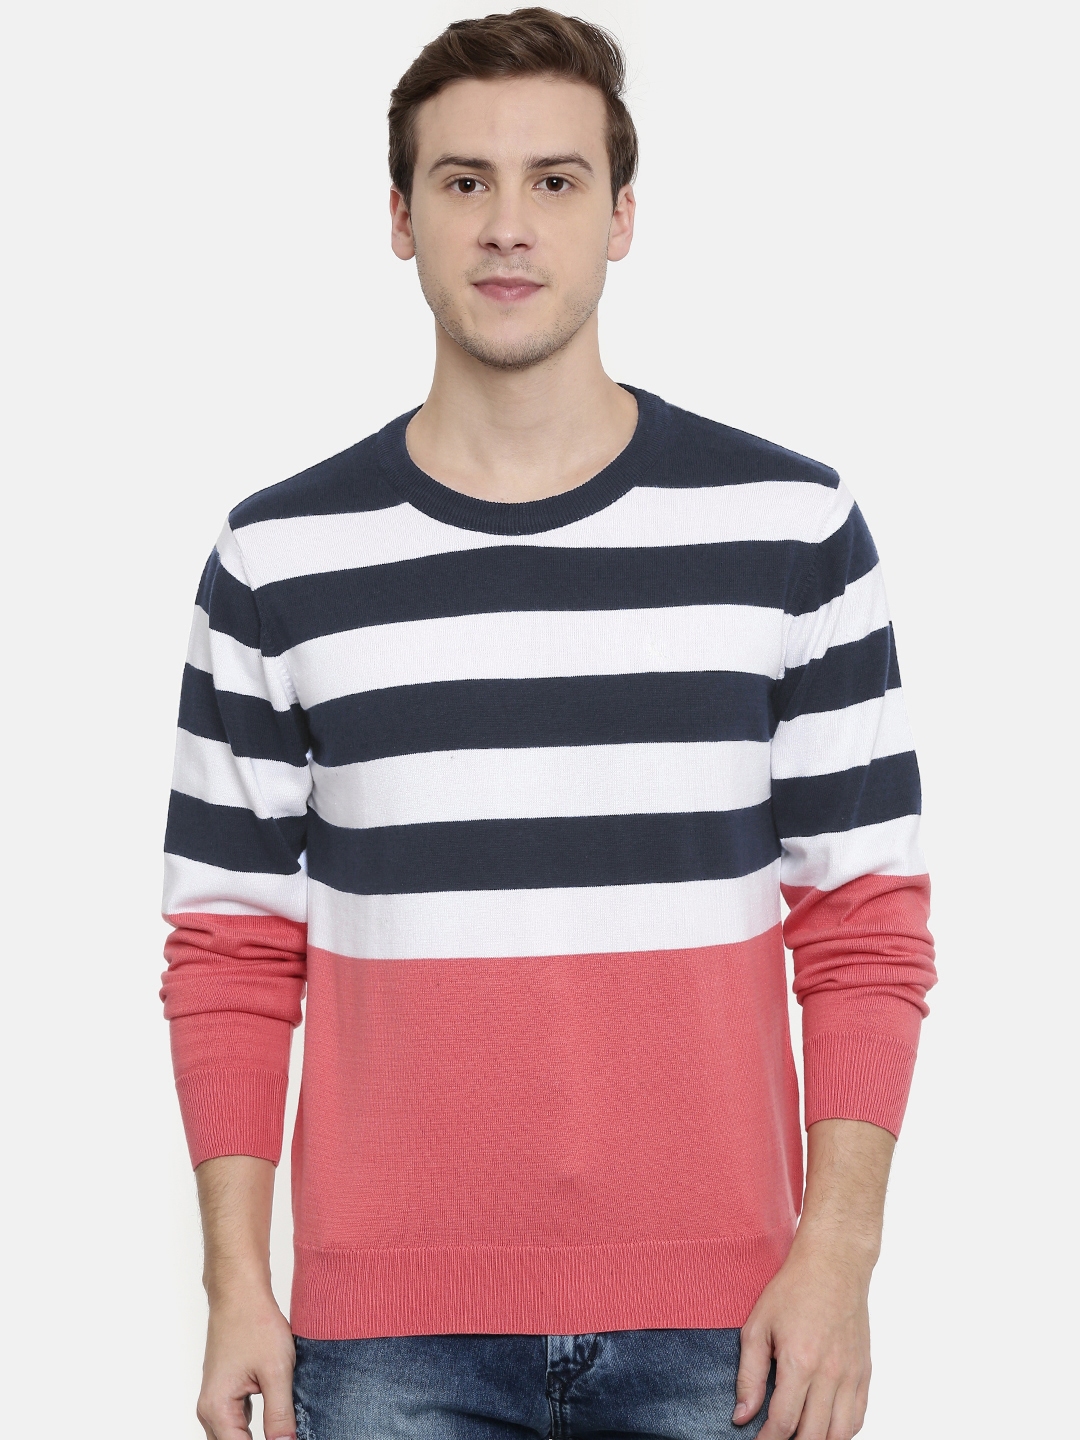 Buy Parx Men White & Navy Blue Striped Sweater - Sweaters for Men ...